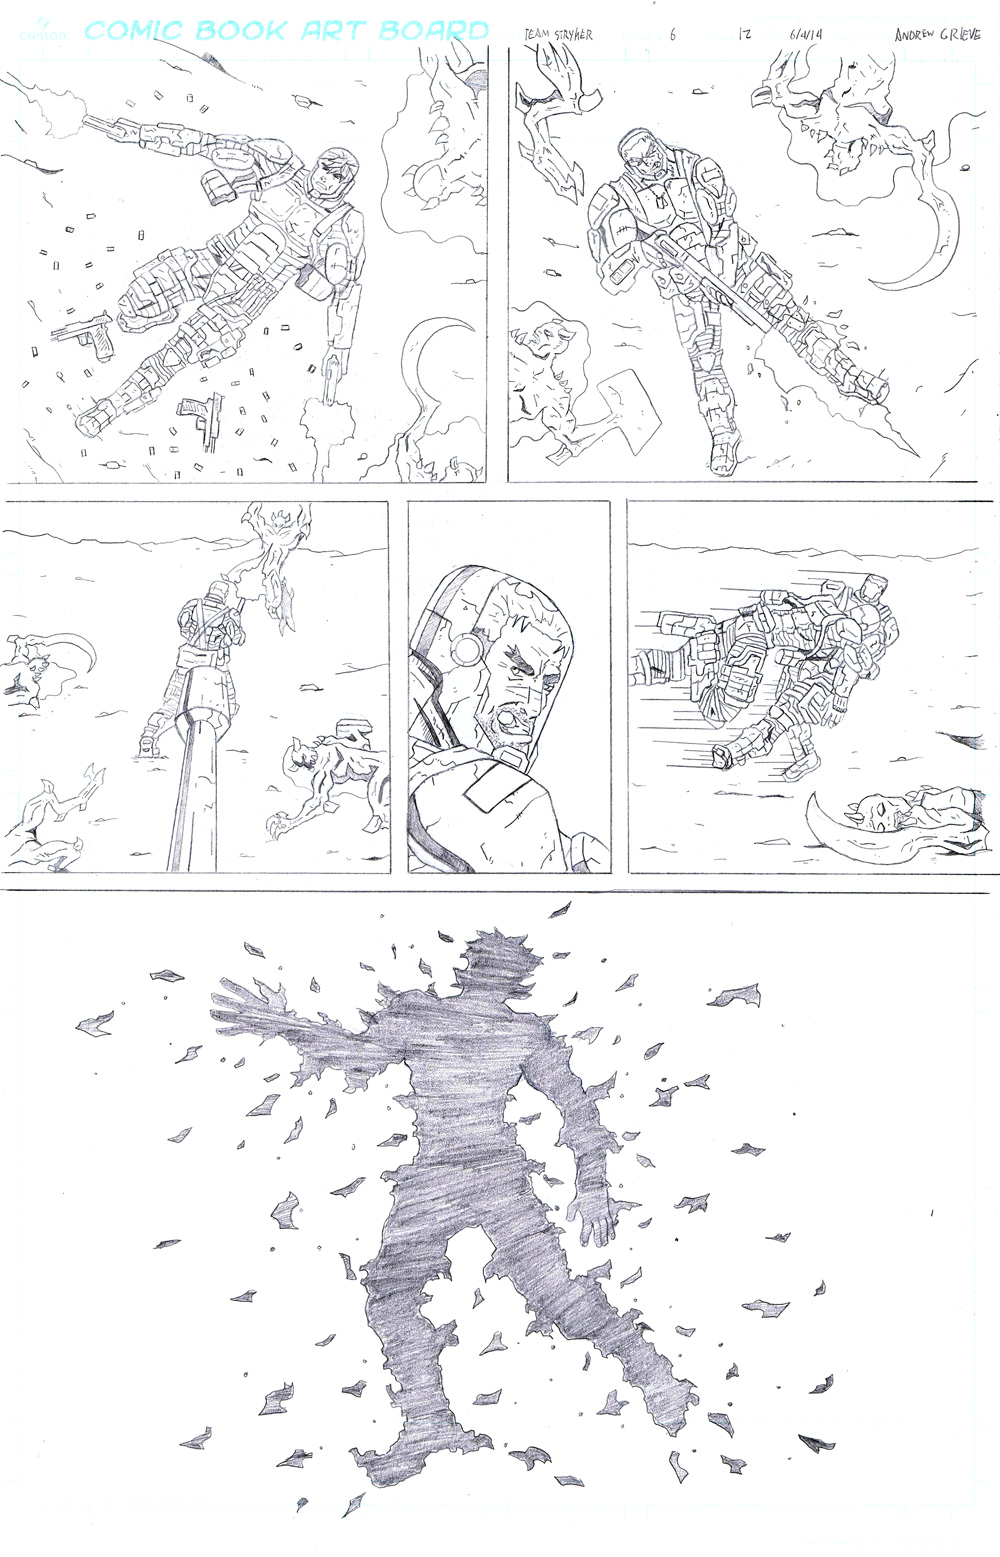 MISSION 006: PAGE 12 PENCIL